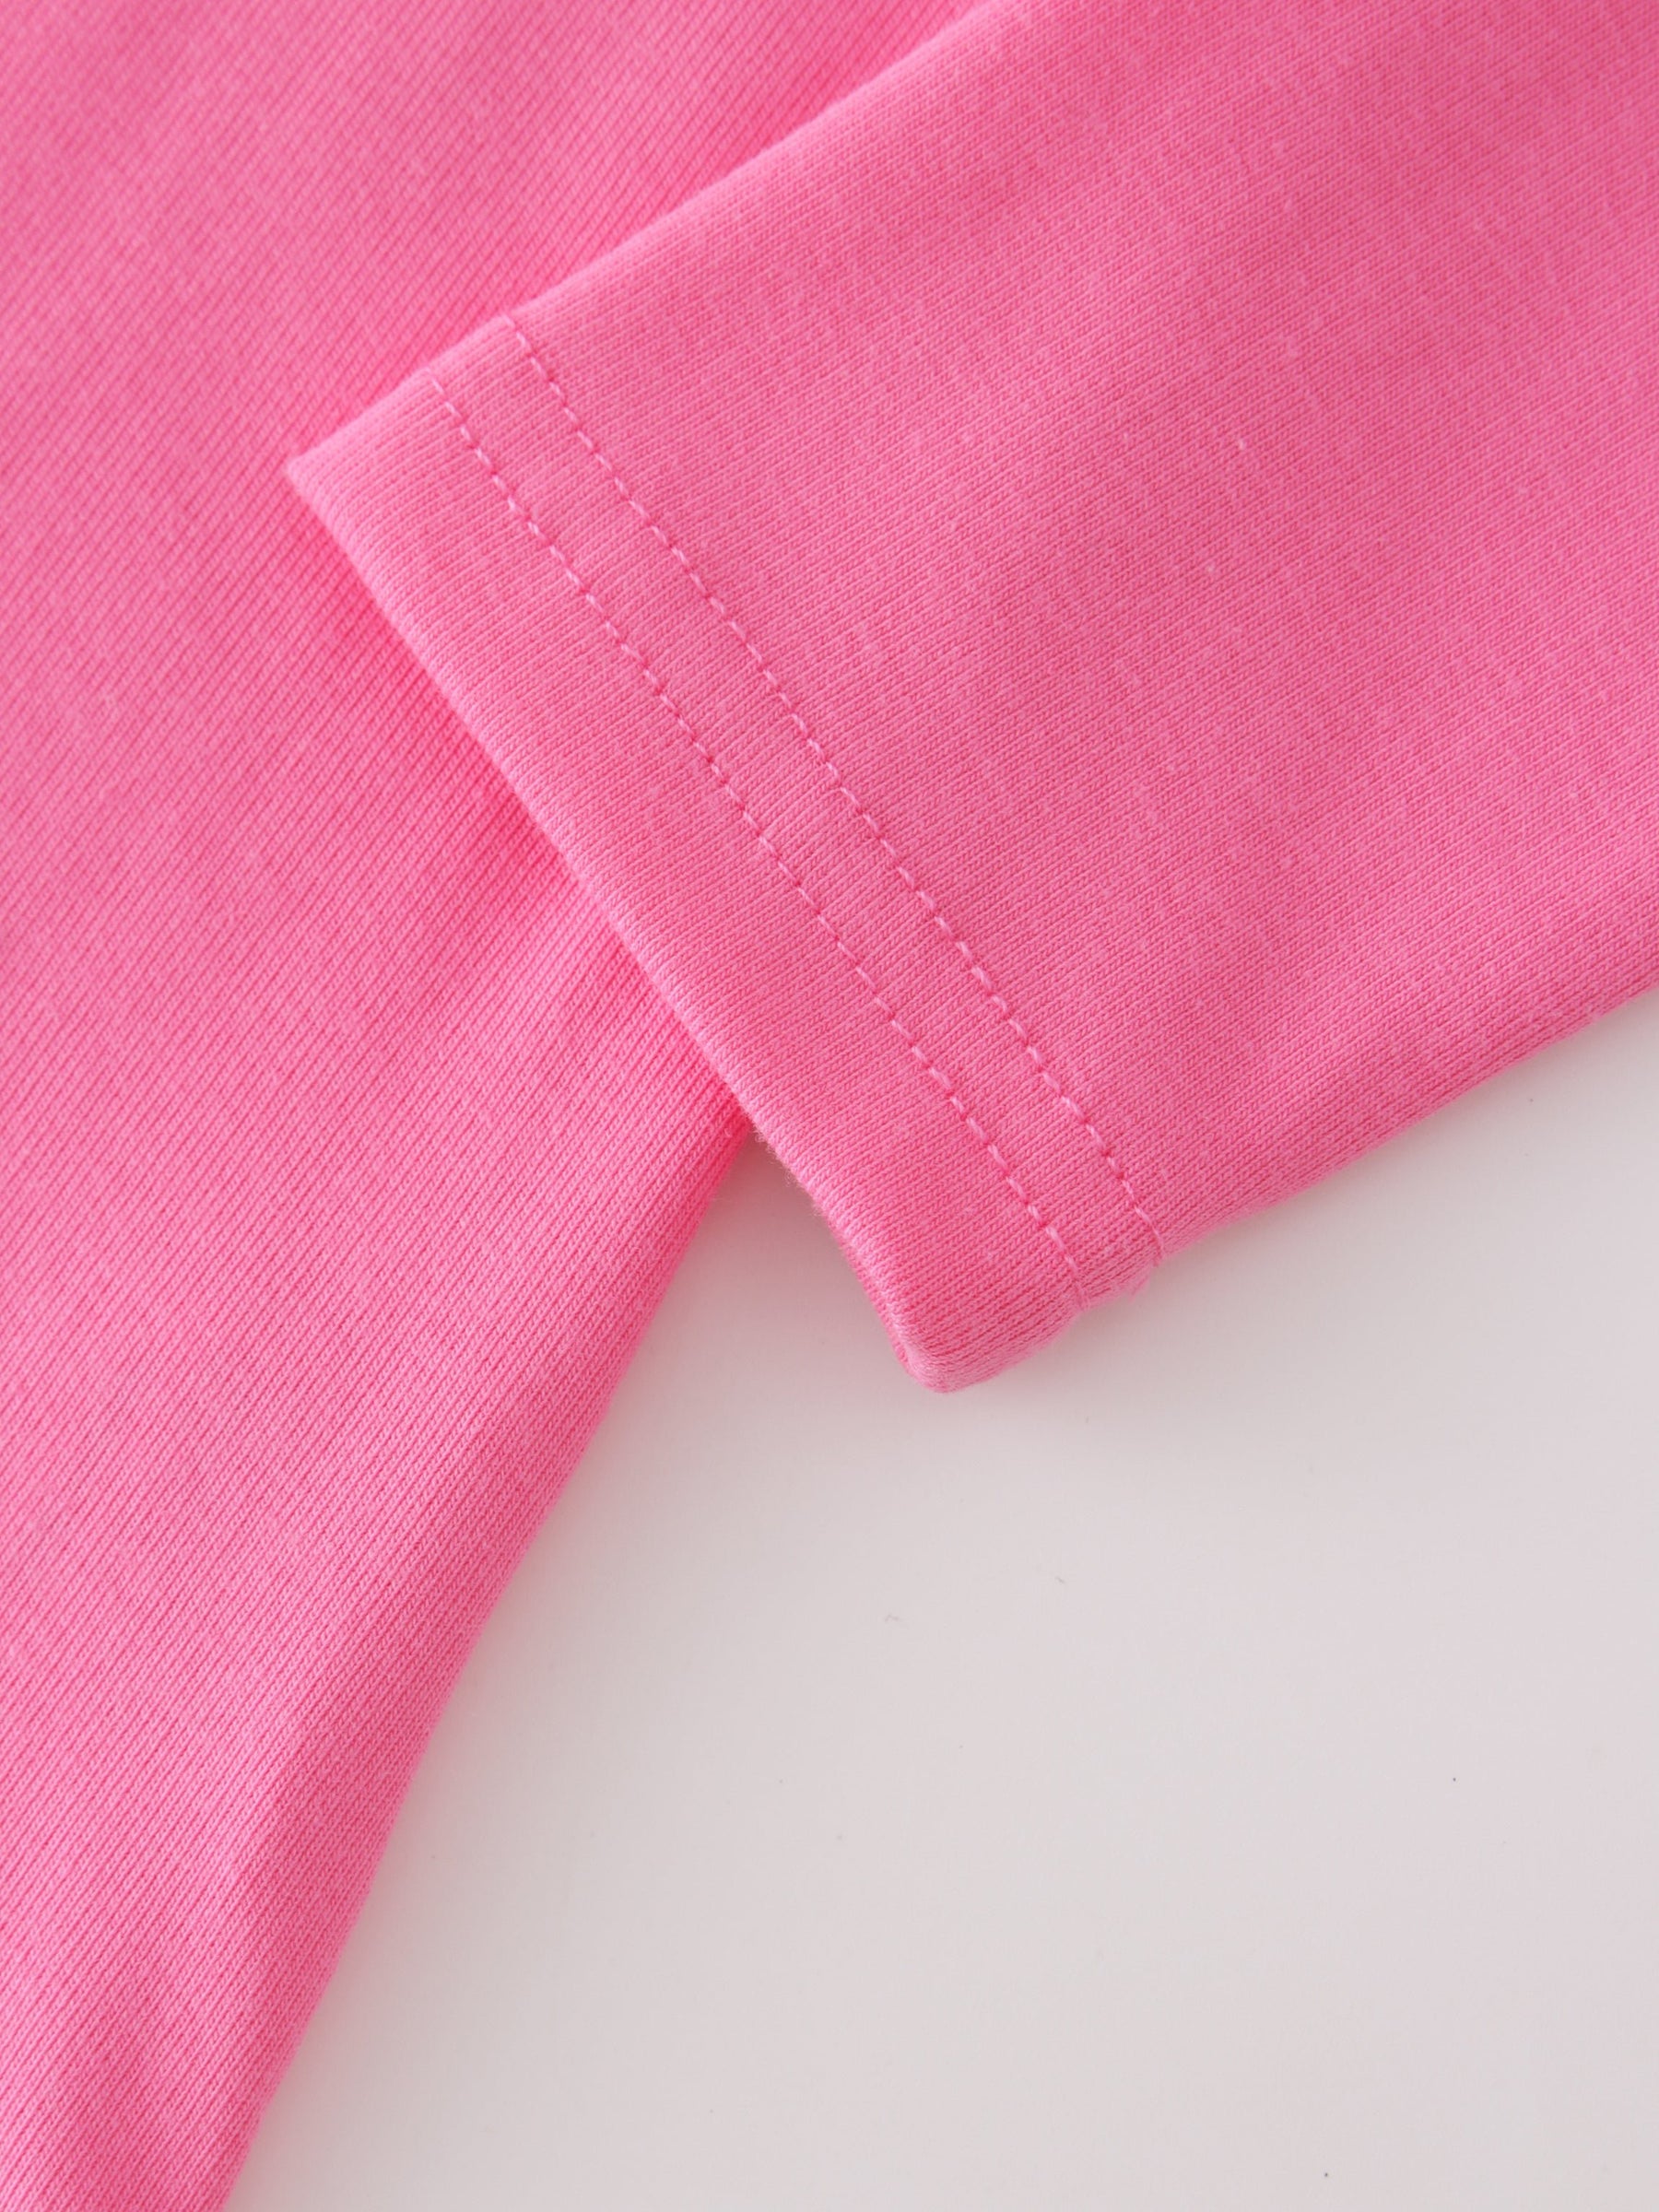 CLASSIC TEE LONG SLEEVE-BRIGHT PINK